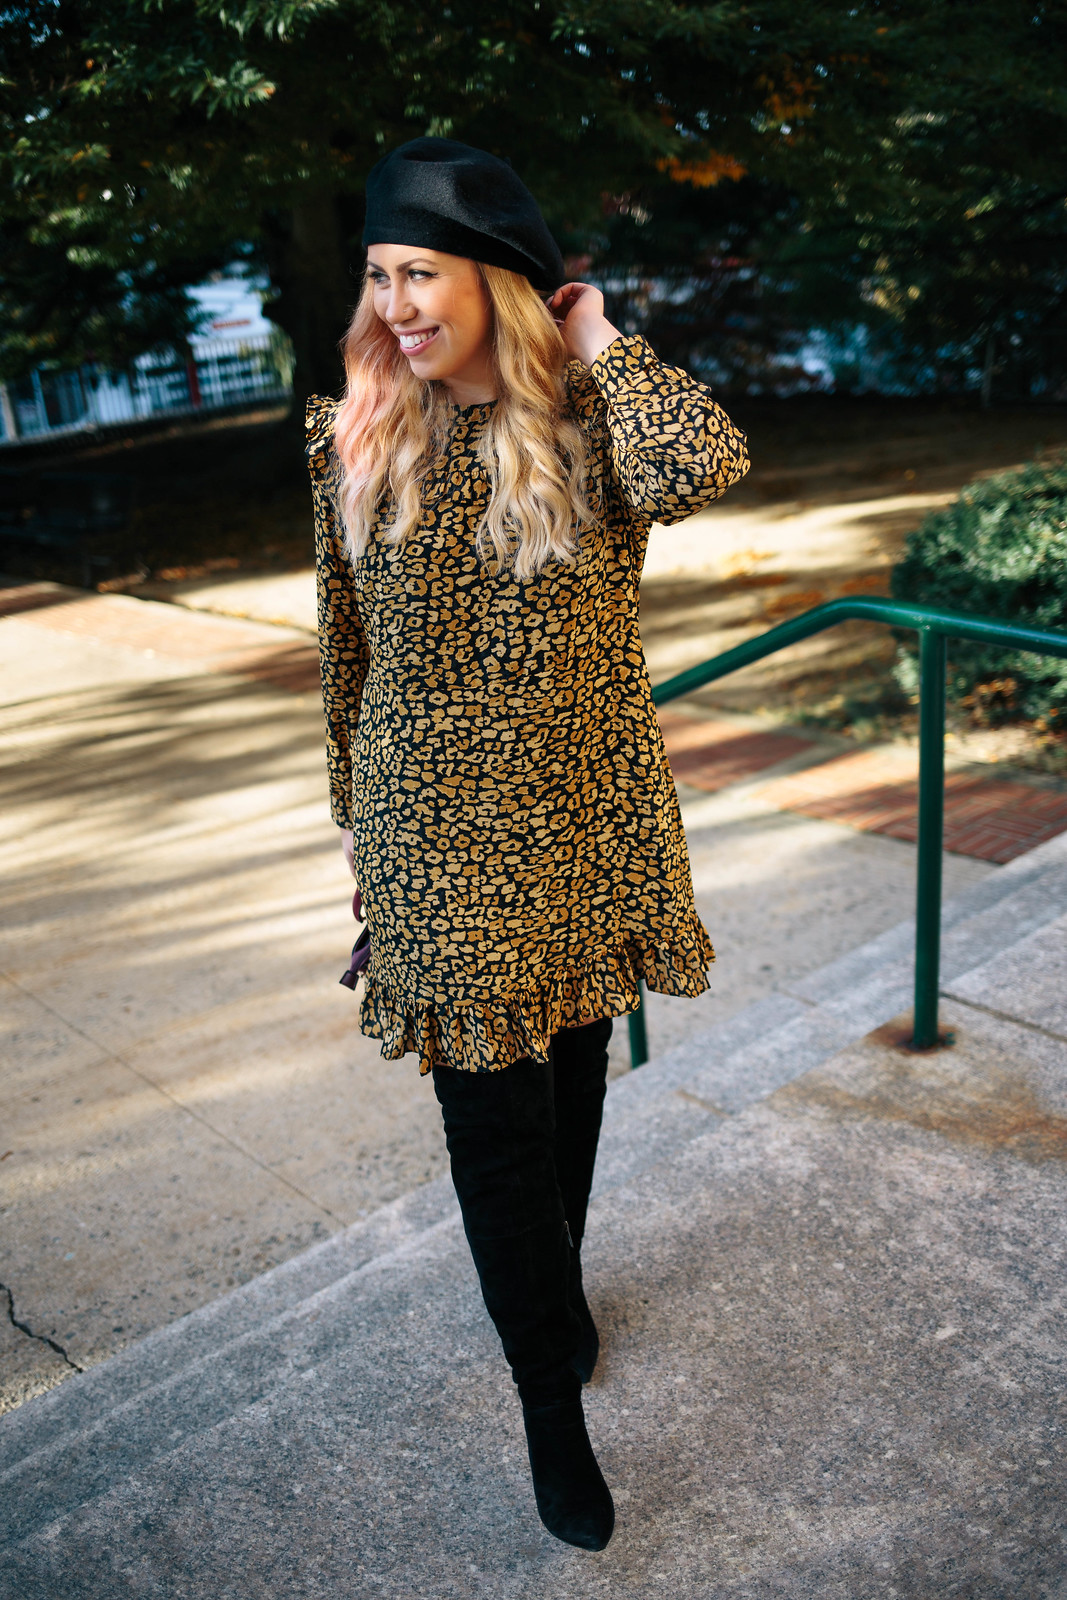 Yellow Cheetah Print Dress Black Suede Over the Knee Boots Black Beret